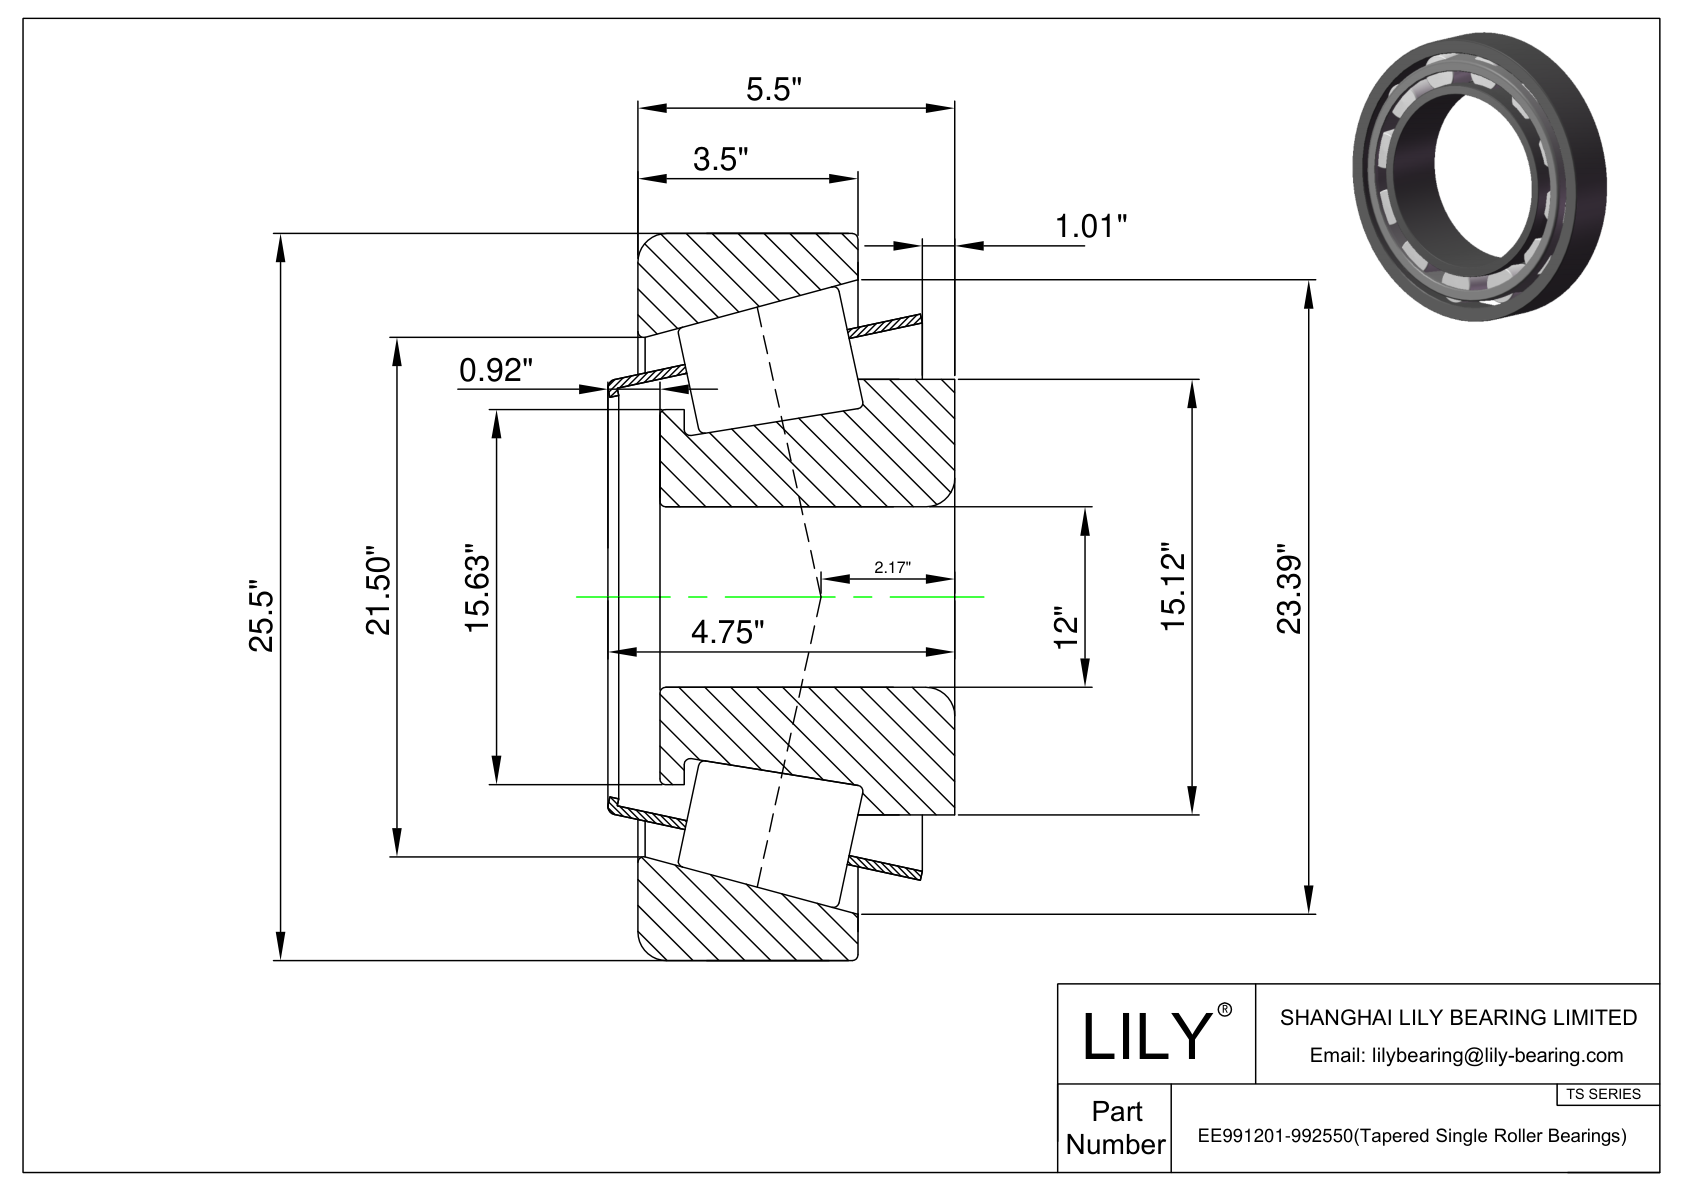 EE991201-992550 TS (Tapered Single Roller Bearings) (Imperial) cad drawing